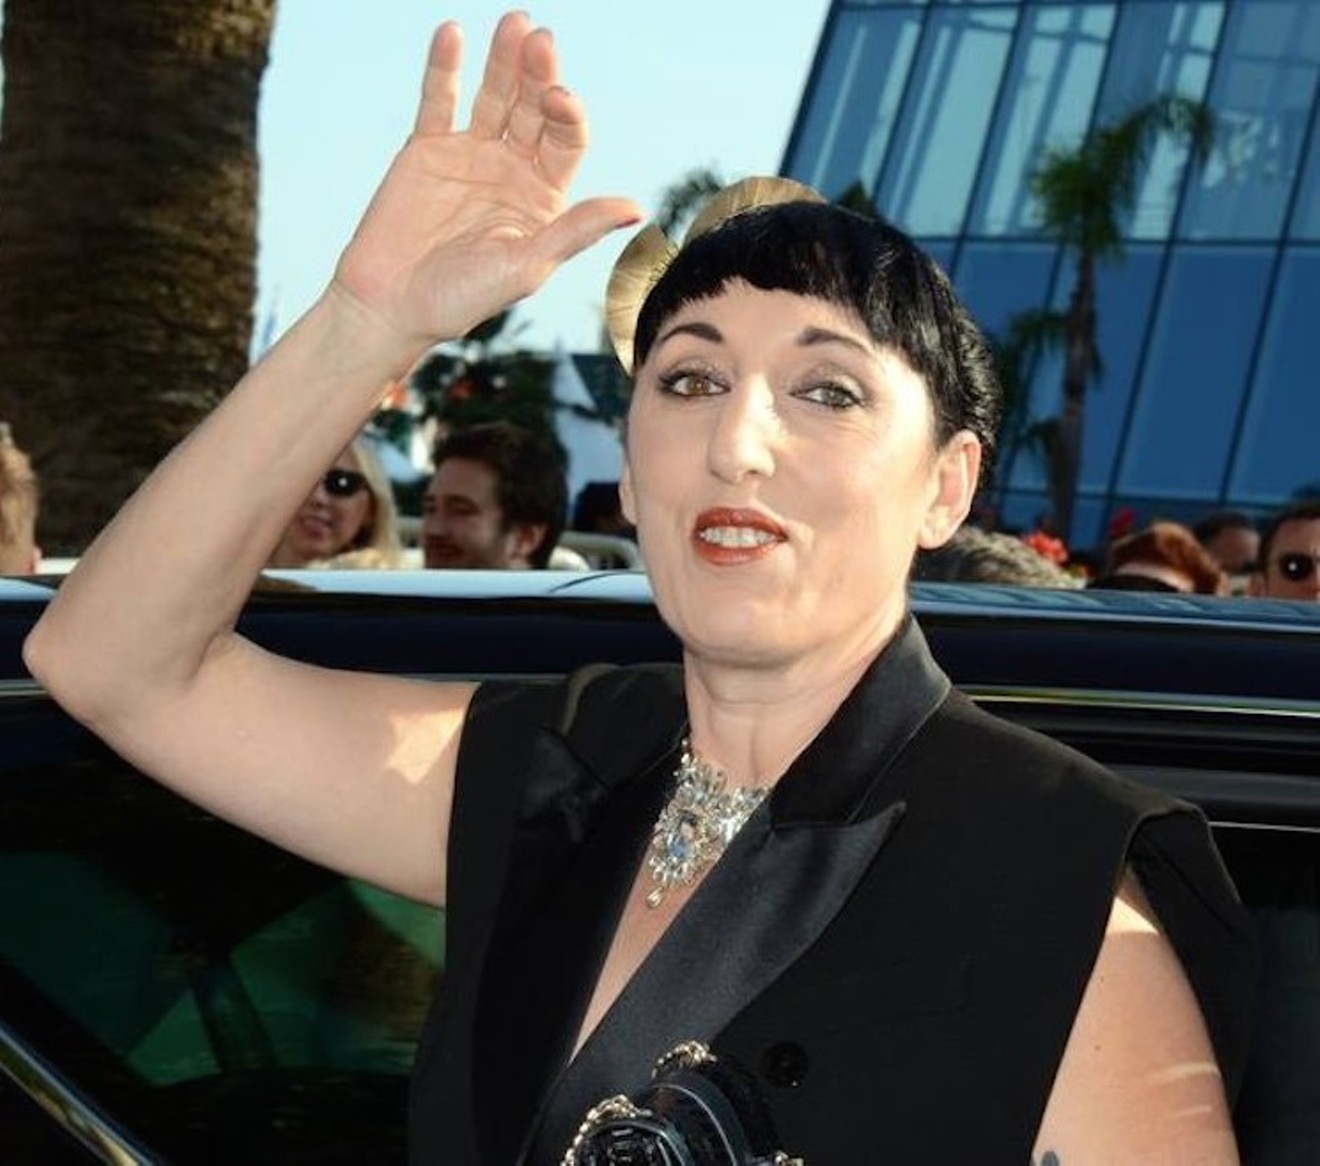 Rossy DePalma, made famous in Pedro Almodovar films such as Women on the Verge of a Nervous Breakdown.